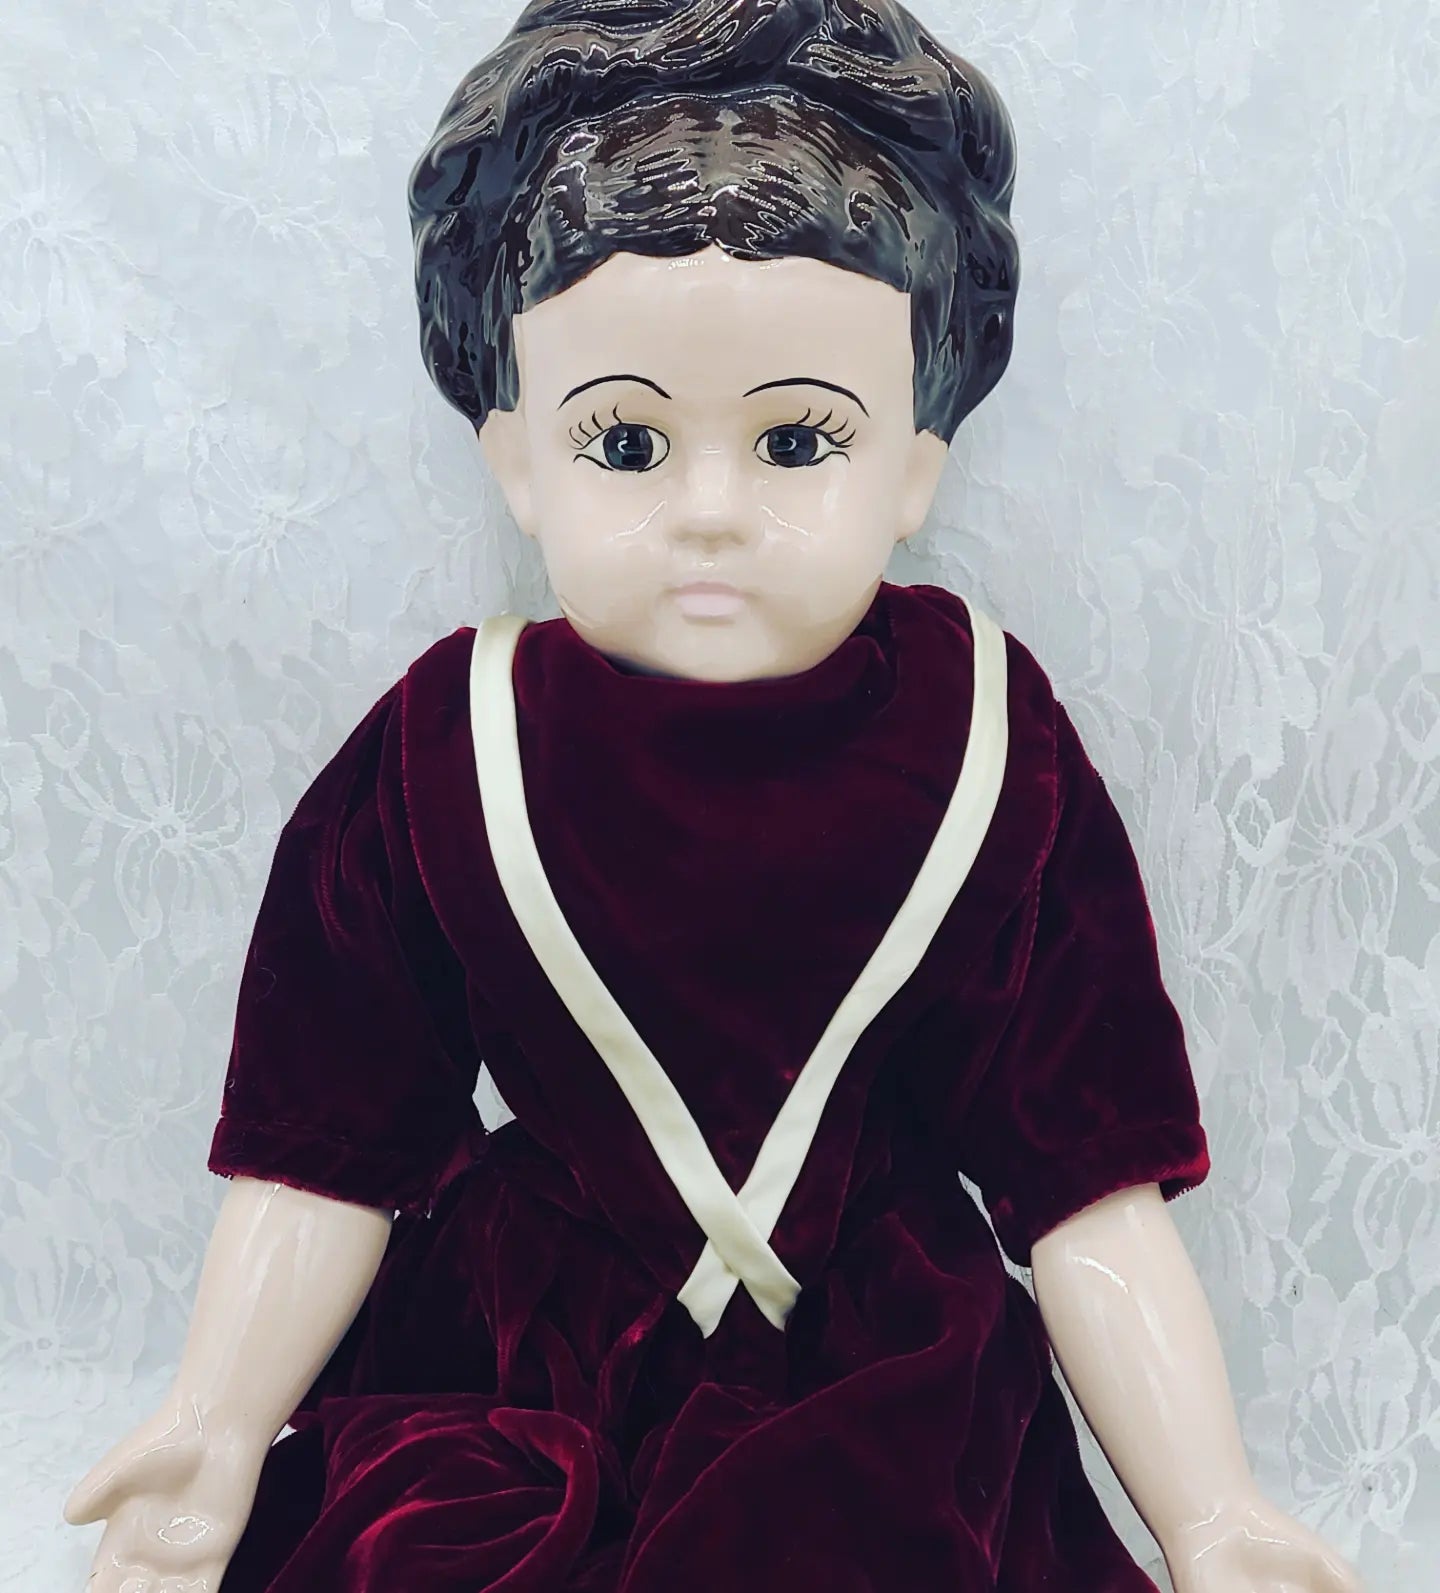 SALE! Jane Haunted Doll ~ 26" BIG Handmade Glazed Bisque French Doll Vessel ~ Adult Woman Spirit ~ Paranormal ~ Mysterious Death ~ Unfinished Business